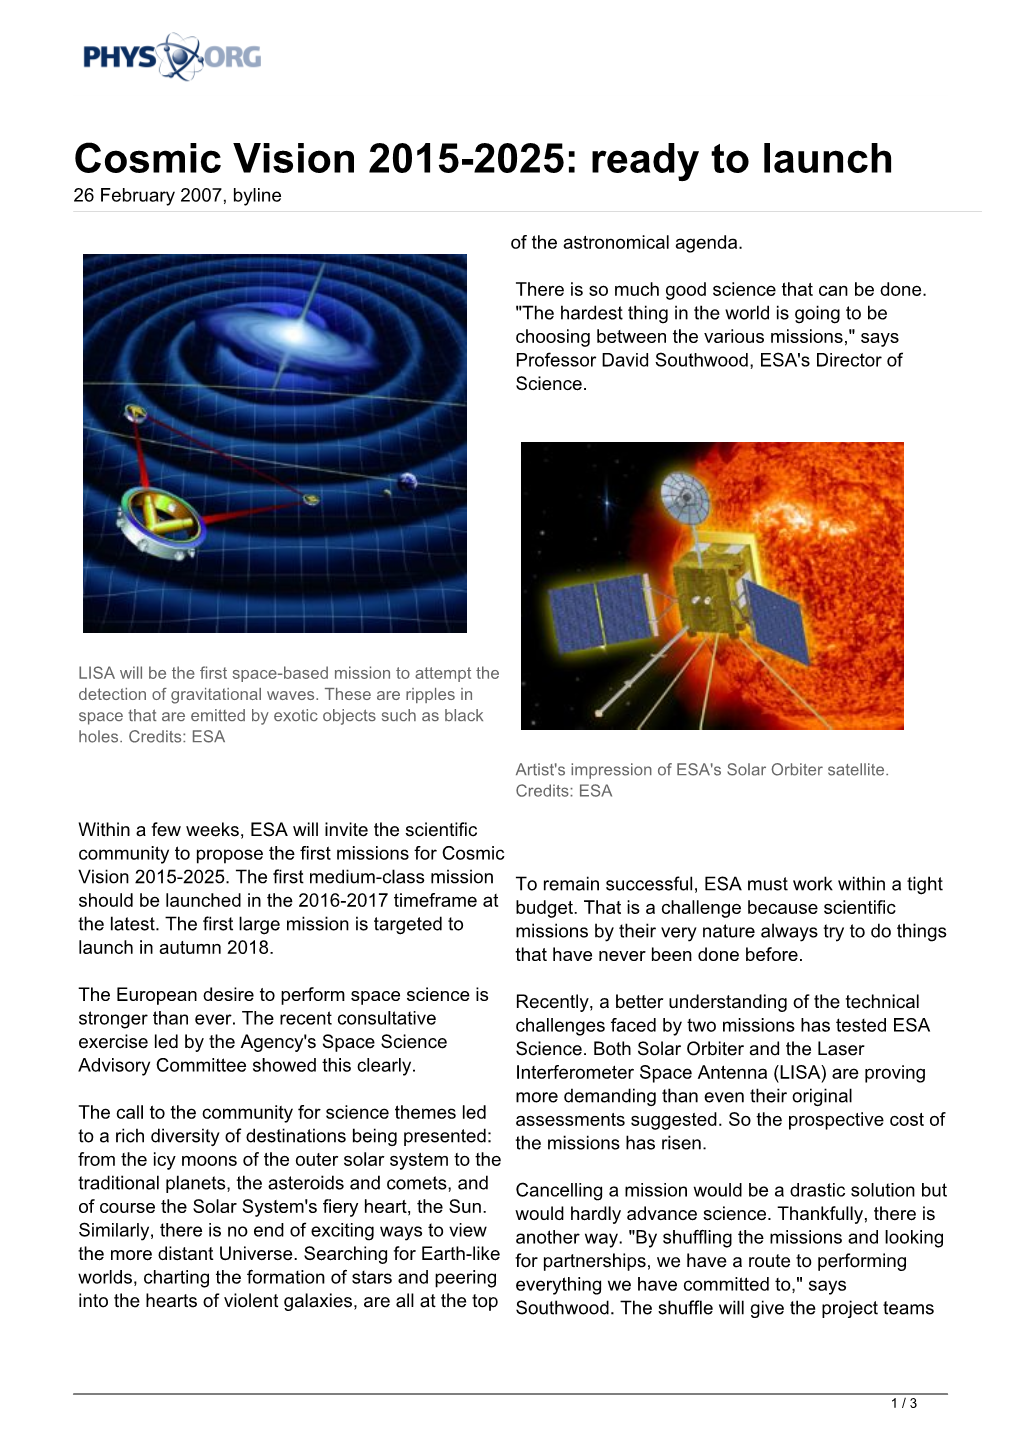 Cosmic Vision 2015-2025: Ready to Launch 26 February 2007, Byline